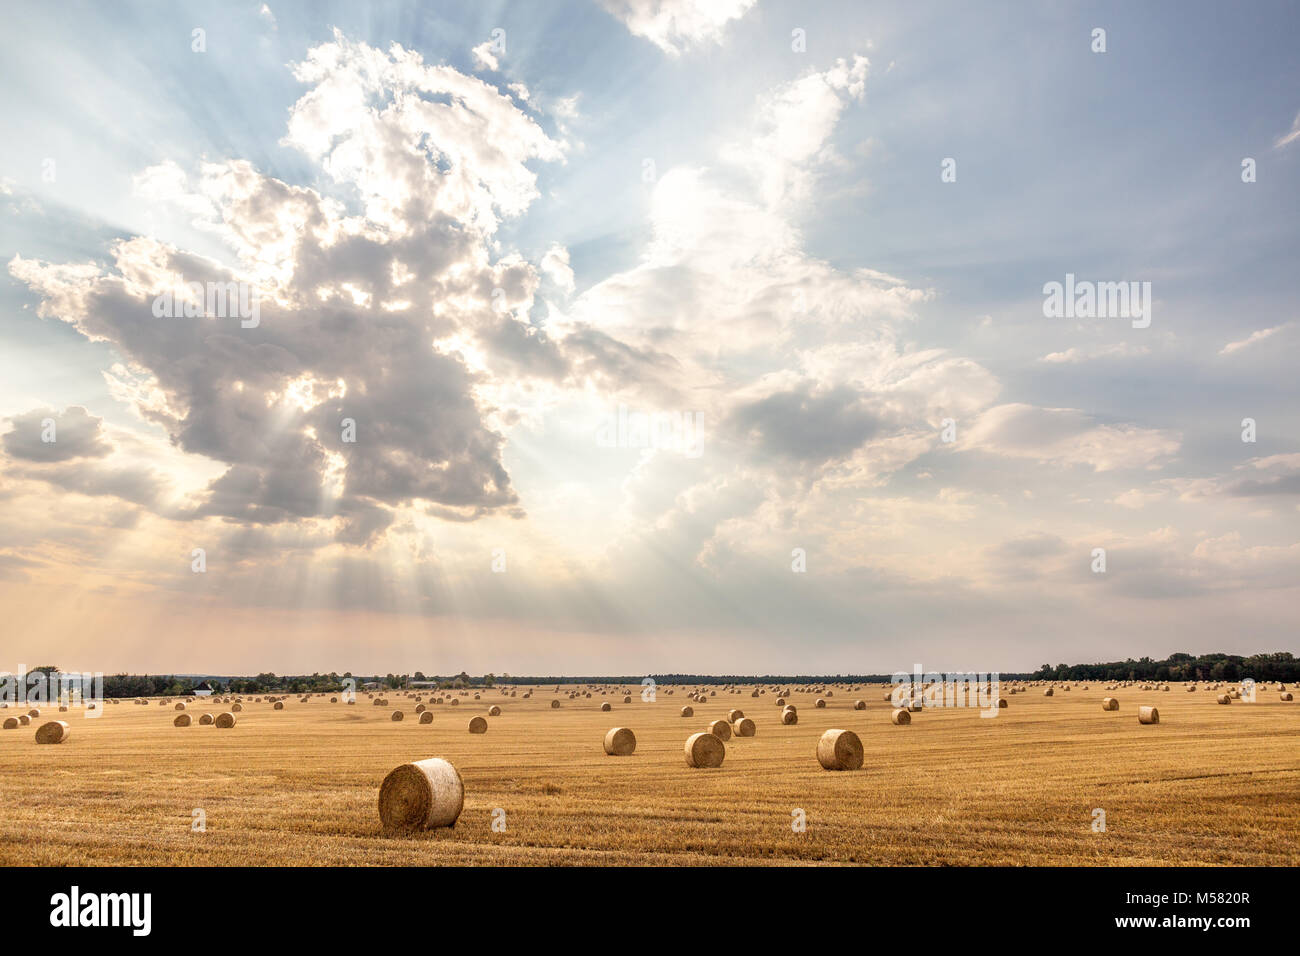 Field near Jacobsdorf, Brandenburg, Germany. The sun behind clouds, sunrays in the sky, bales of staw lie on the stubble field. Stock Photo